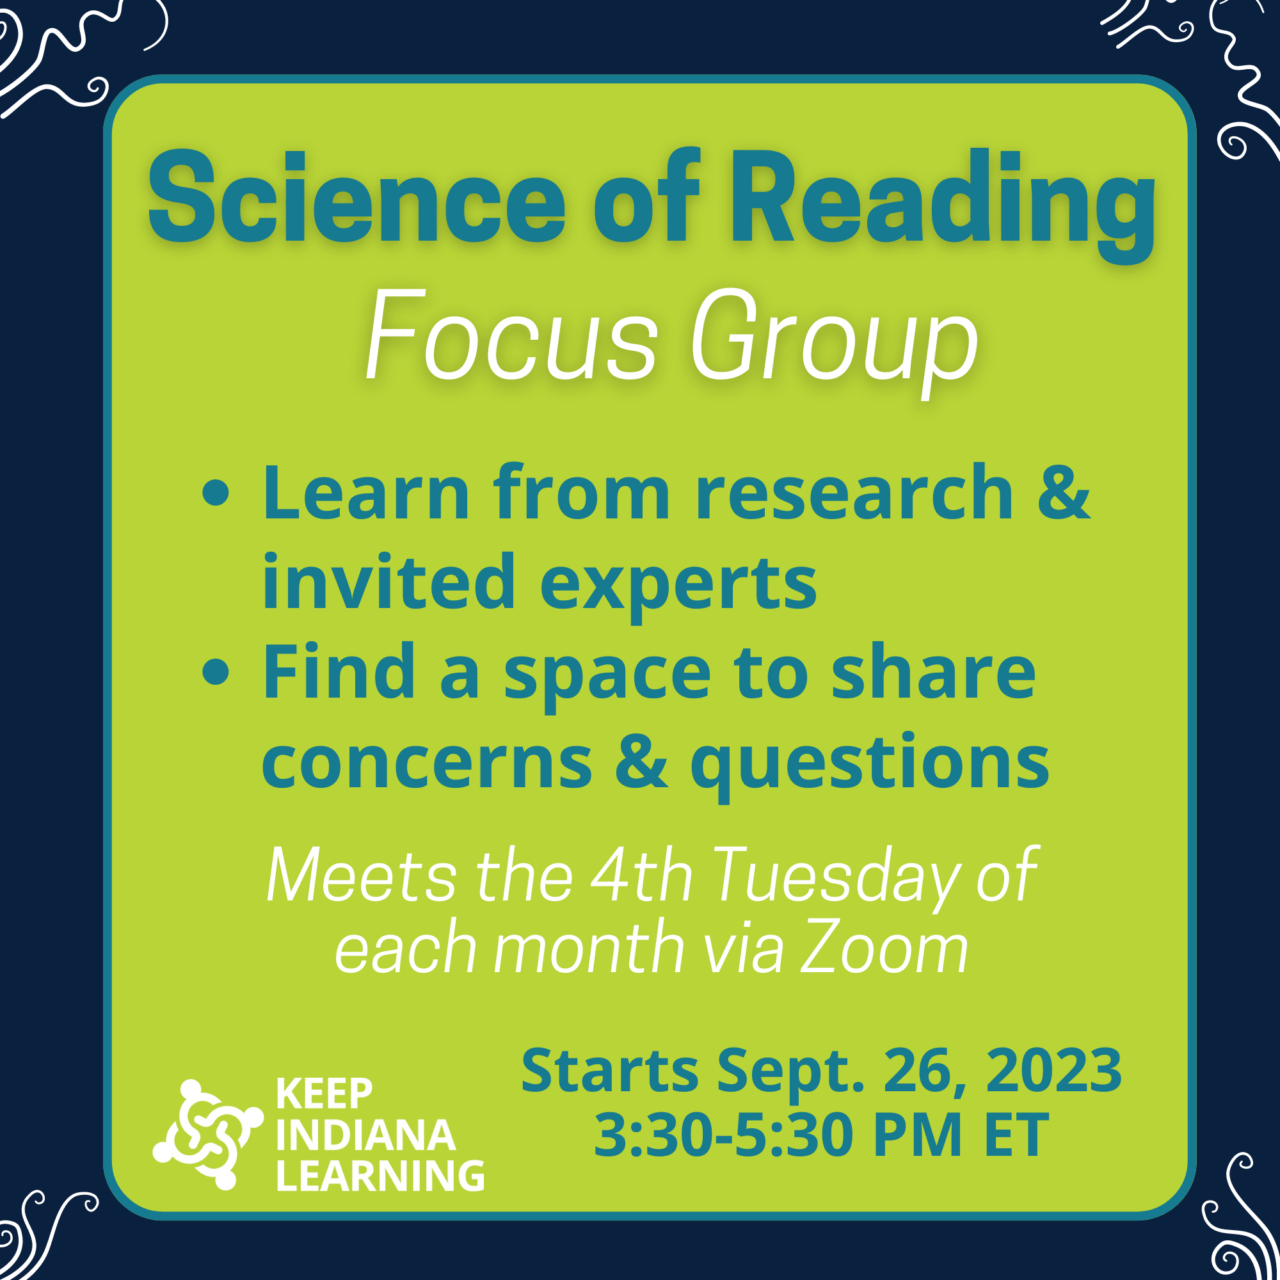 Science of Reading Focus Groups Featured Image